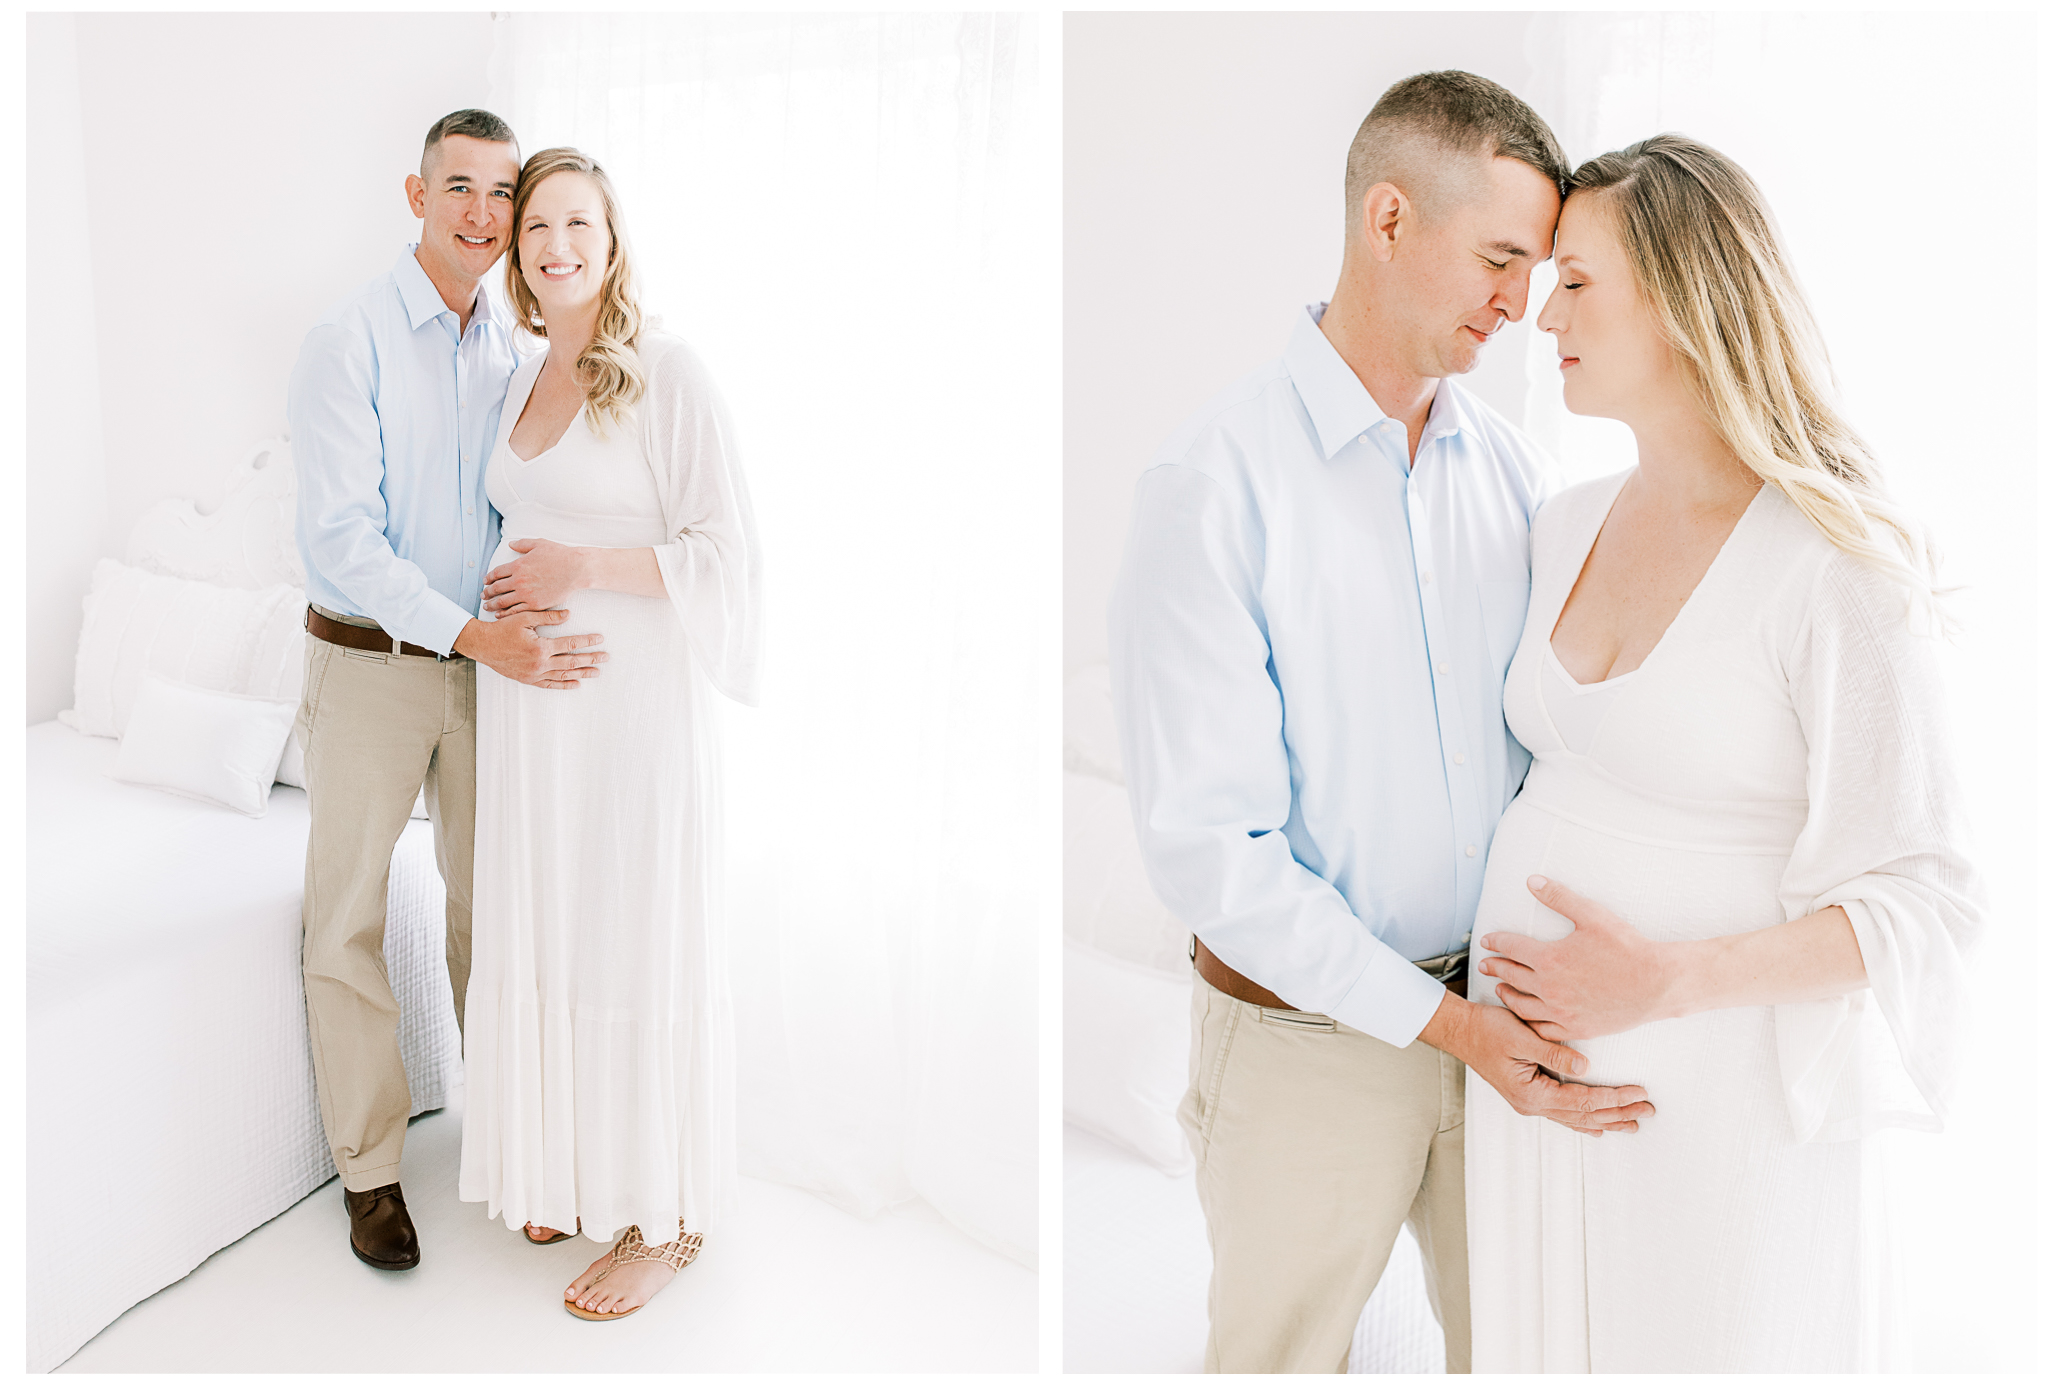 Dayton Maternity Photography | Winter Freire Photography | Dayton, Ohio Photographer | Organic Maternity Studio Session Centerville, OH | Timeless Organic Maternity Portraits